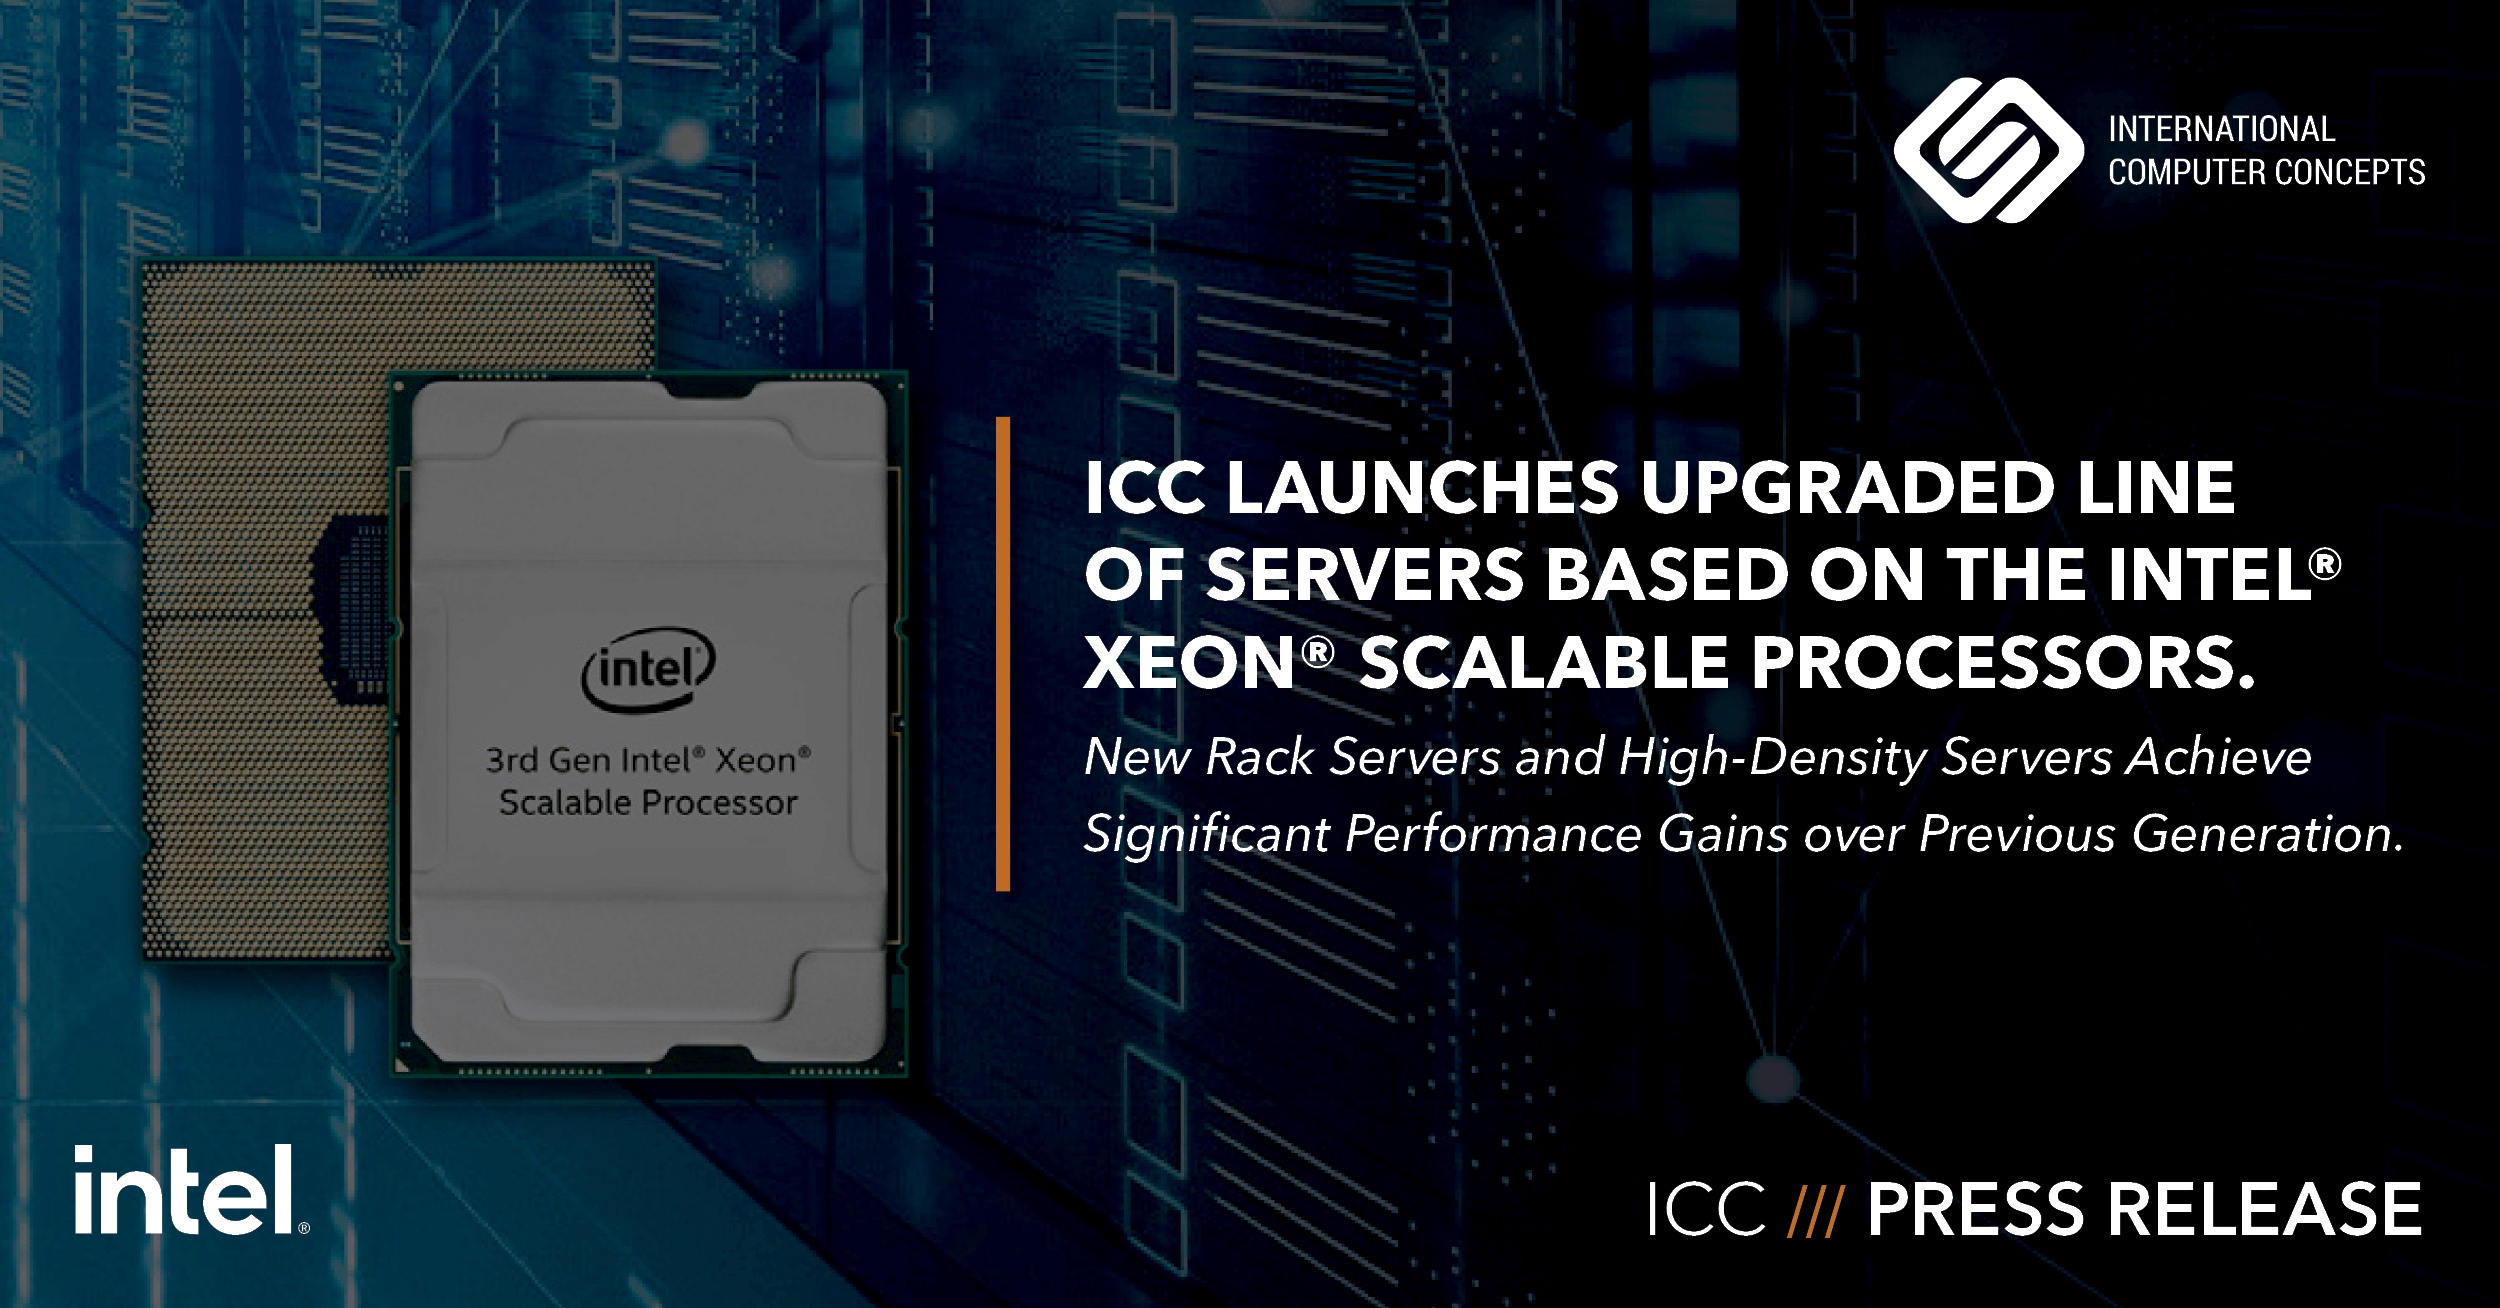 ICC Launches Upgraded Line of Servers Based on the Intel® Xeon® Scalable Processors